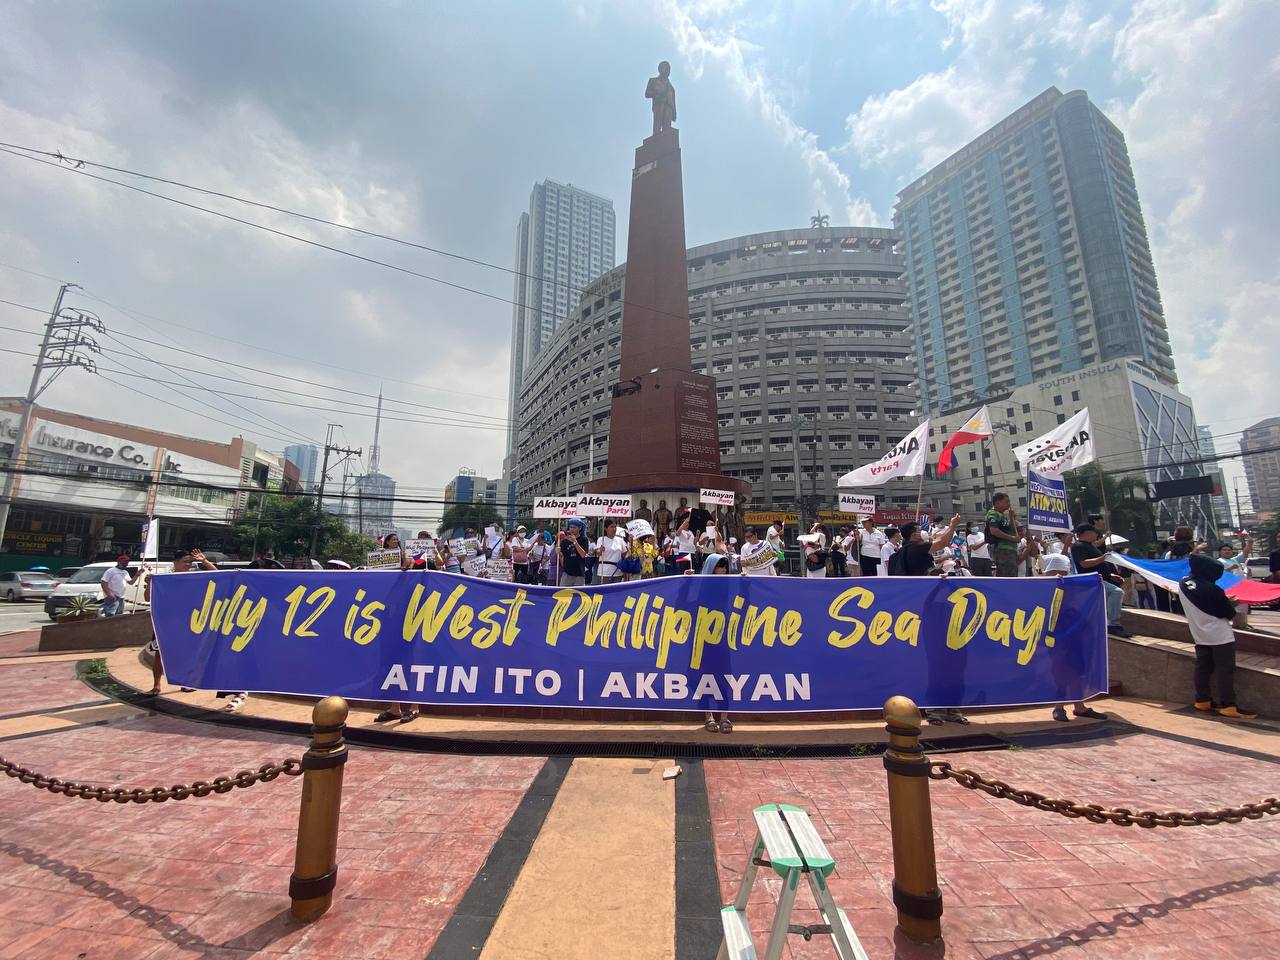 Calls for July 12 to be declared as West Philippine Sea (WPS) Victory Day were renewed by advocates